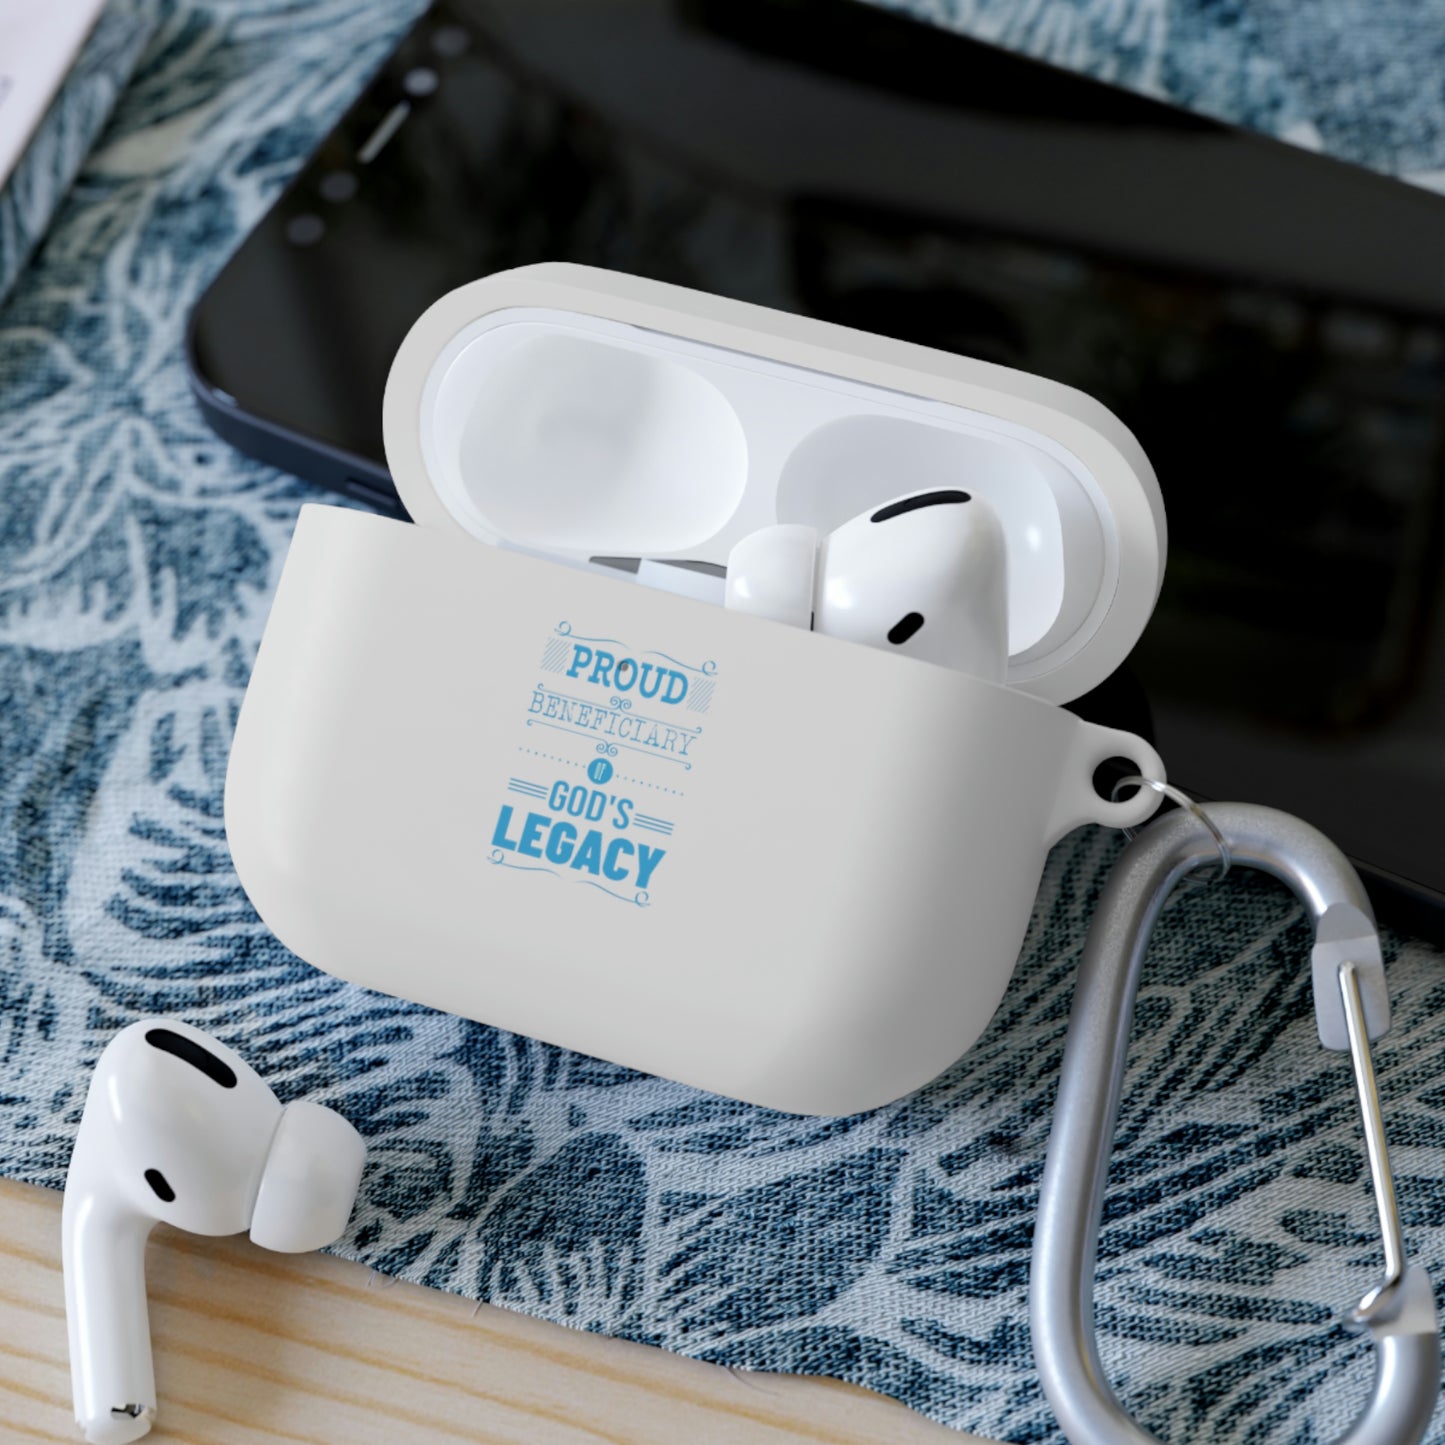 Proud Beneficiary Of God's Legacy AirPods / Airpods Pro Case cover